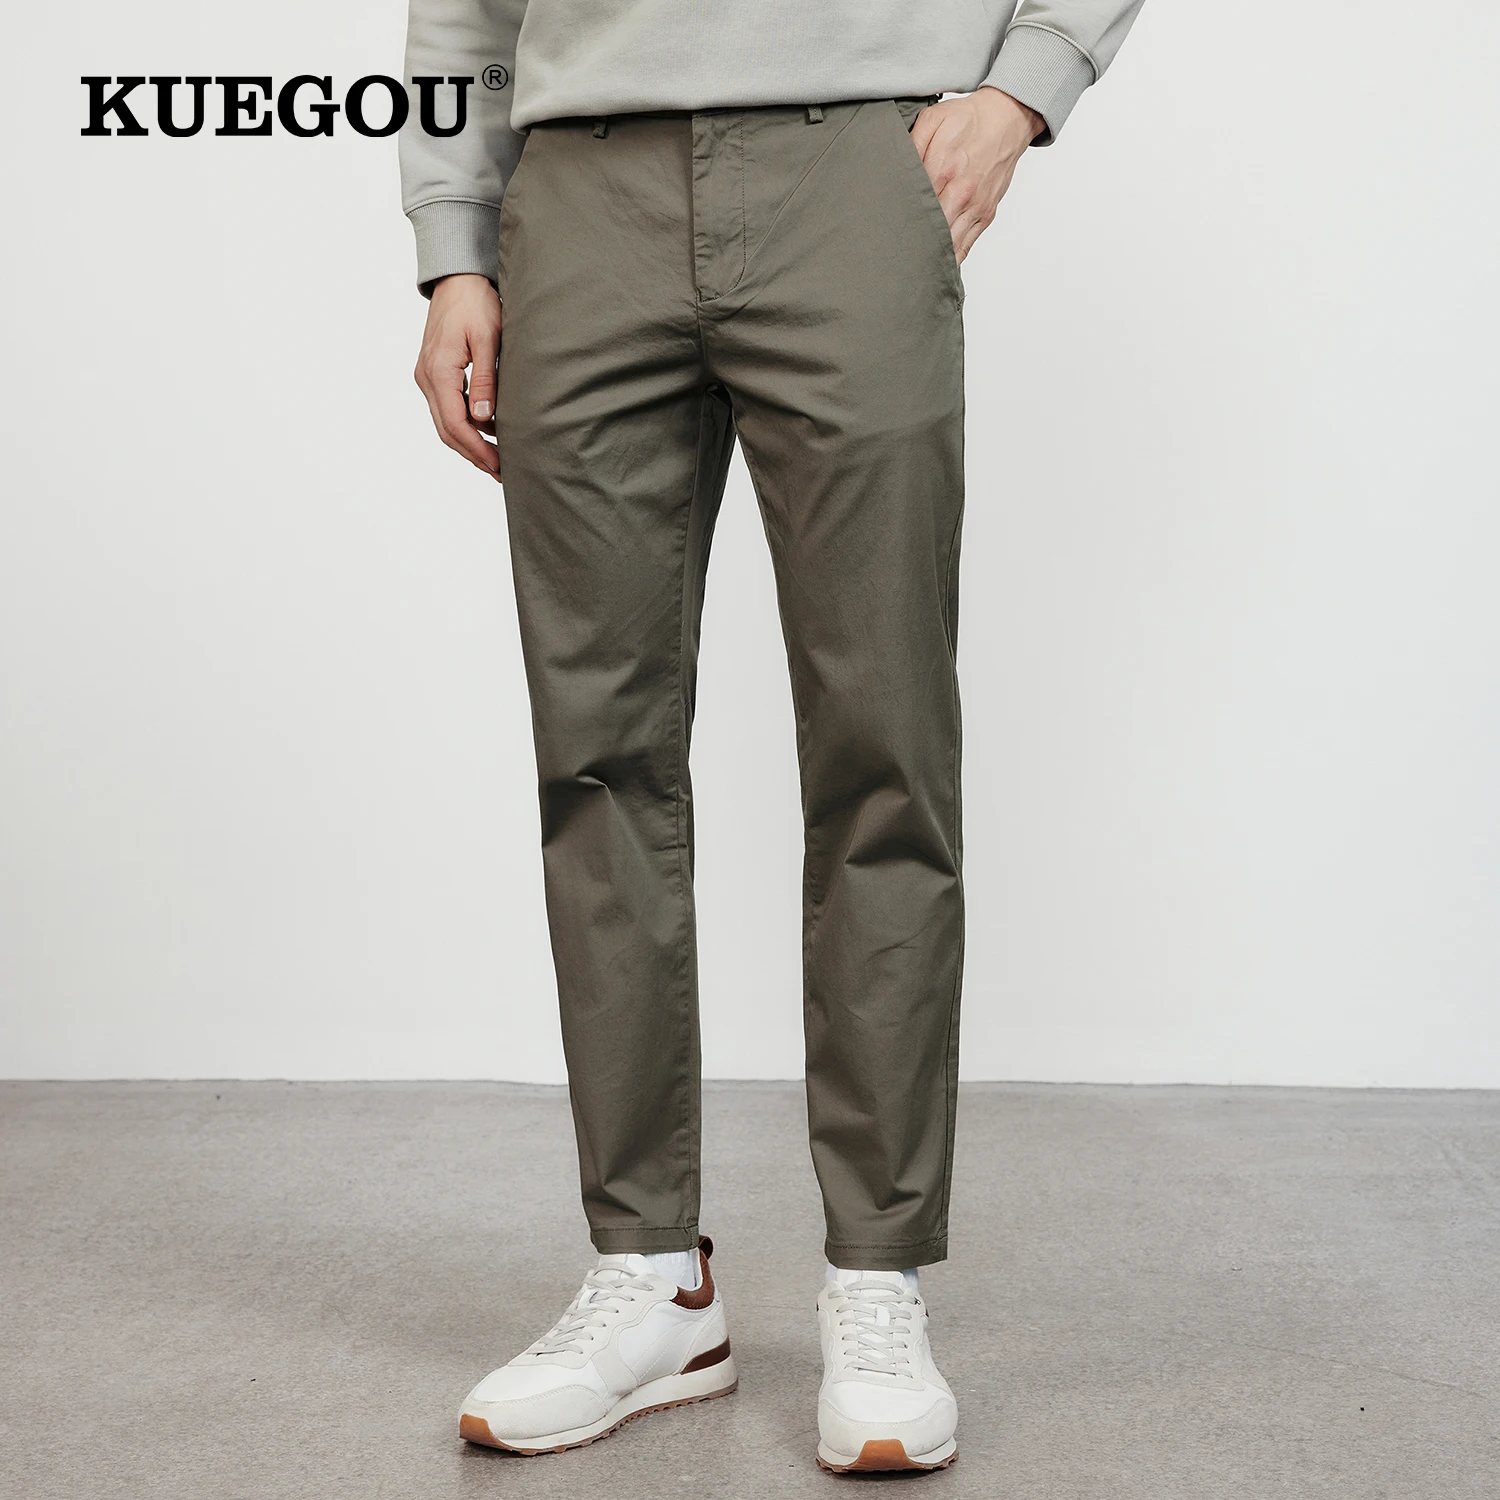 

KUEGOU 2022 Autumn New Men's Straight Pants Thin Ankle-Length Stretch Casual Khaki-green Trousers Cotton Blend Plus Size 3116